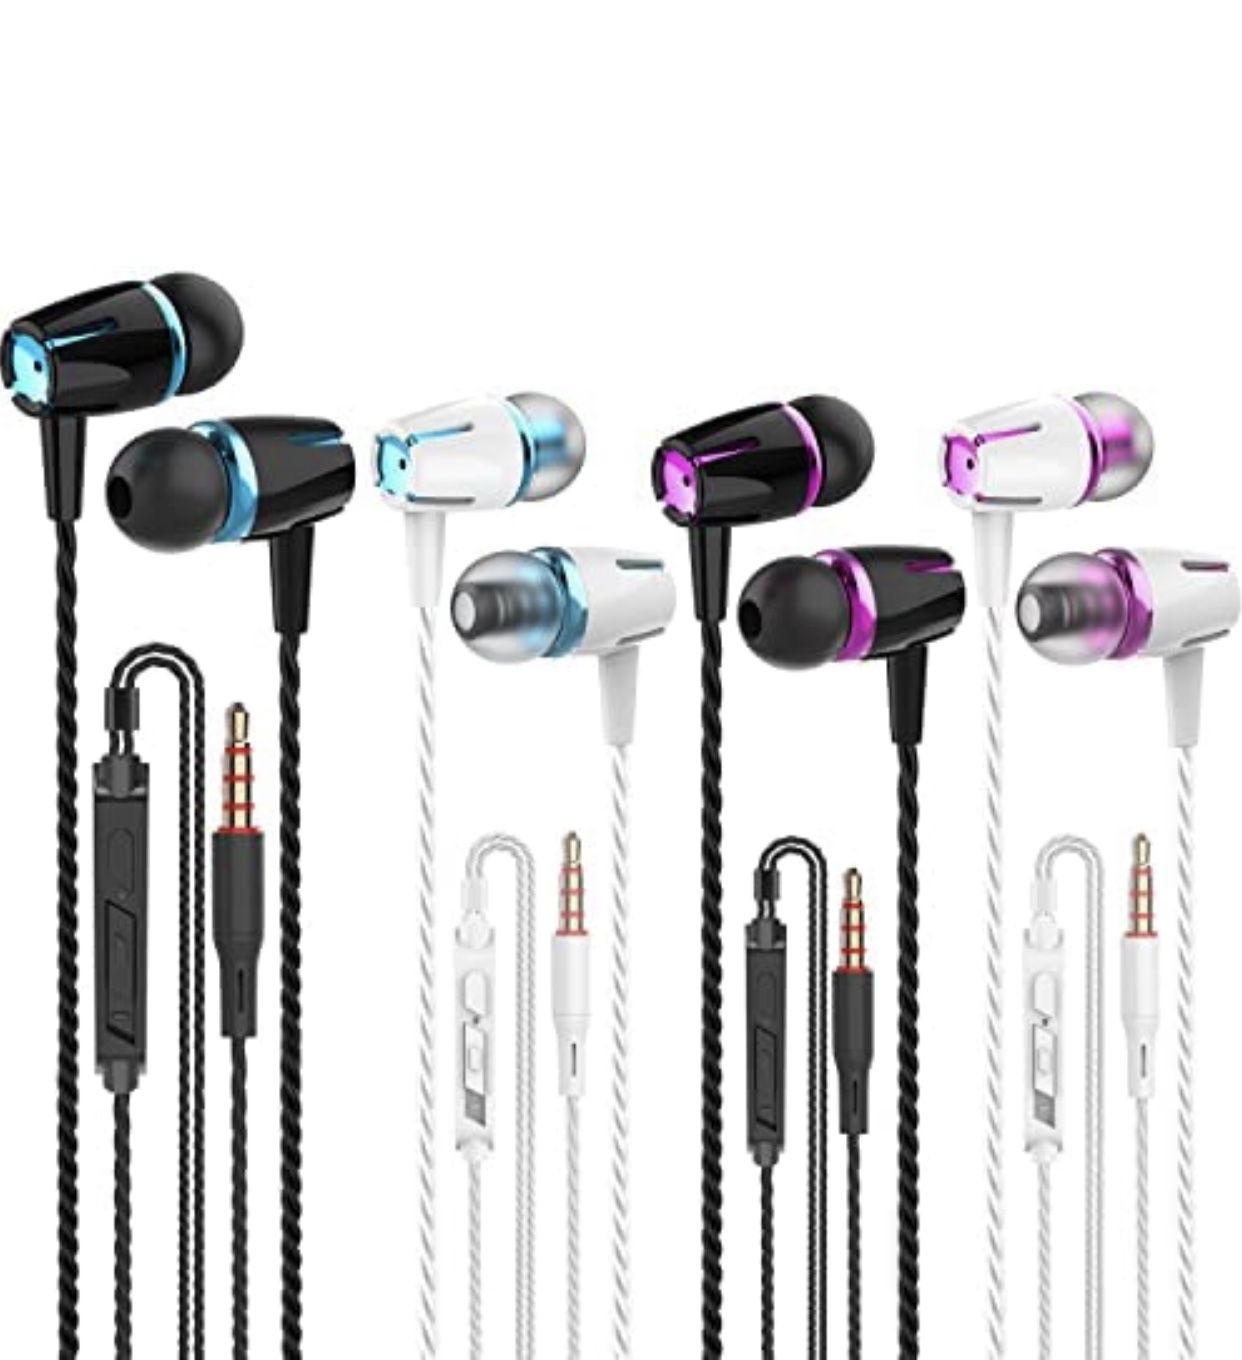 VPB Headphones with Remote and Mic, Noise Isolating Stereo Earbuds, Tangle Free for iOS and Android Smartphones, Portable (Mixed Color, 4 Pairs)